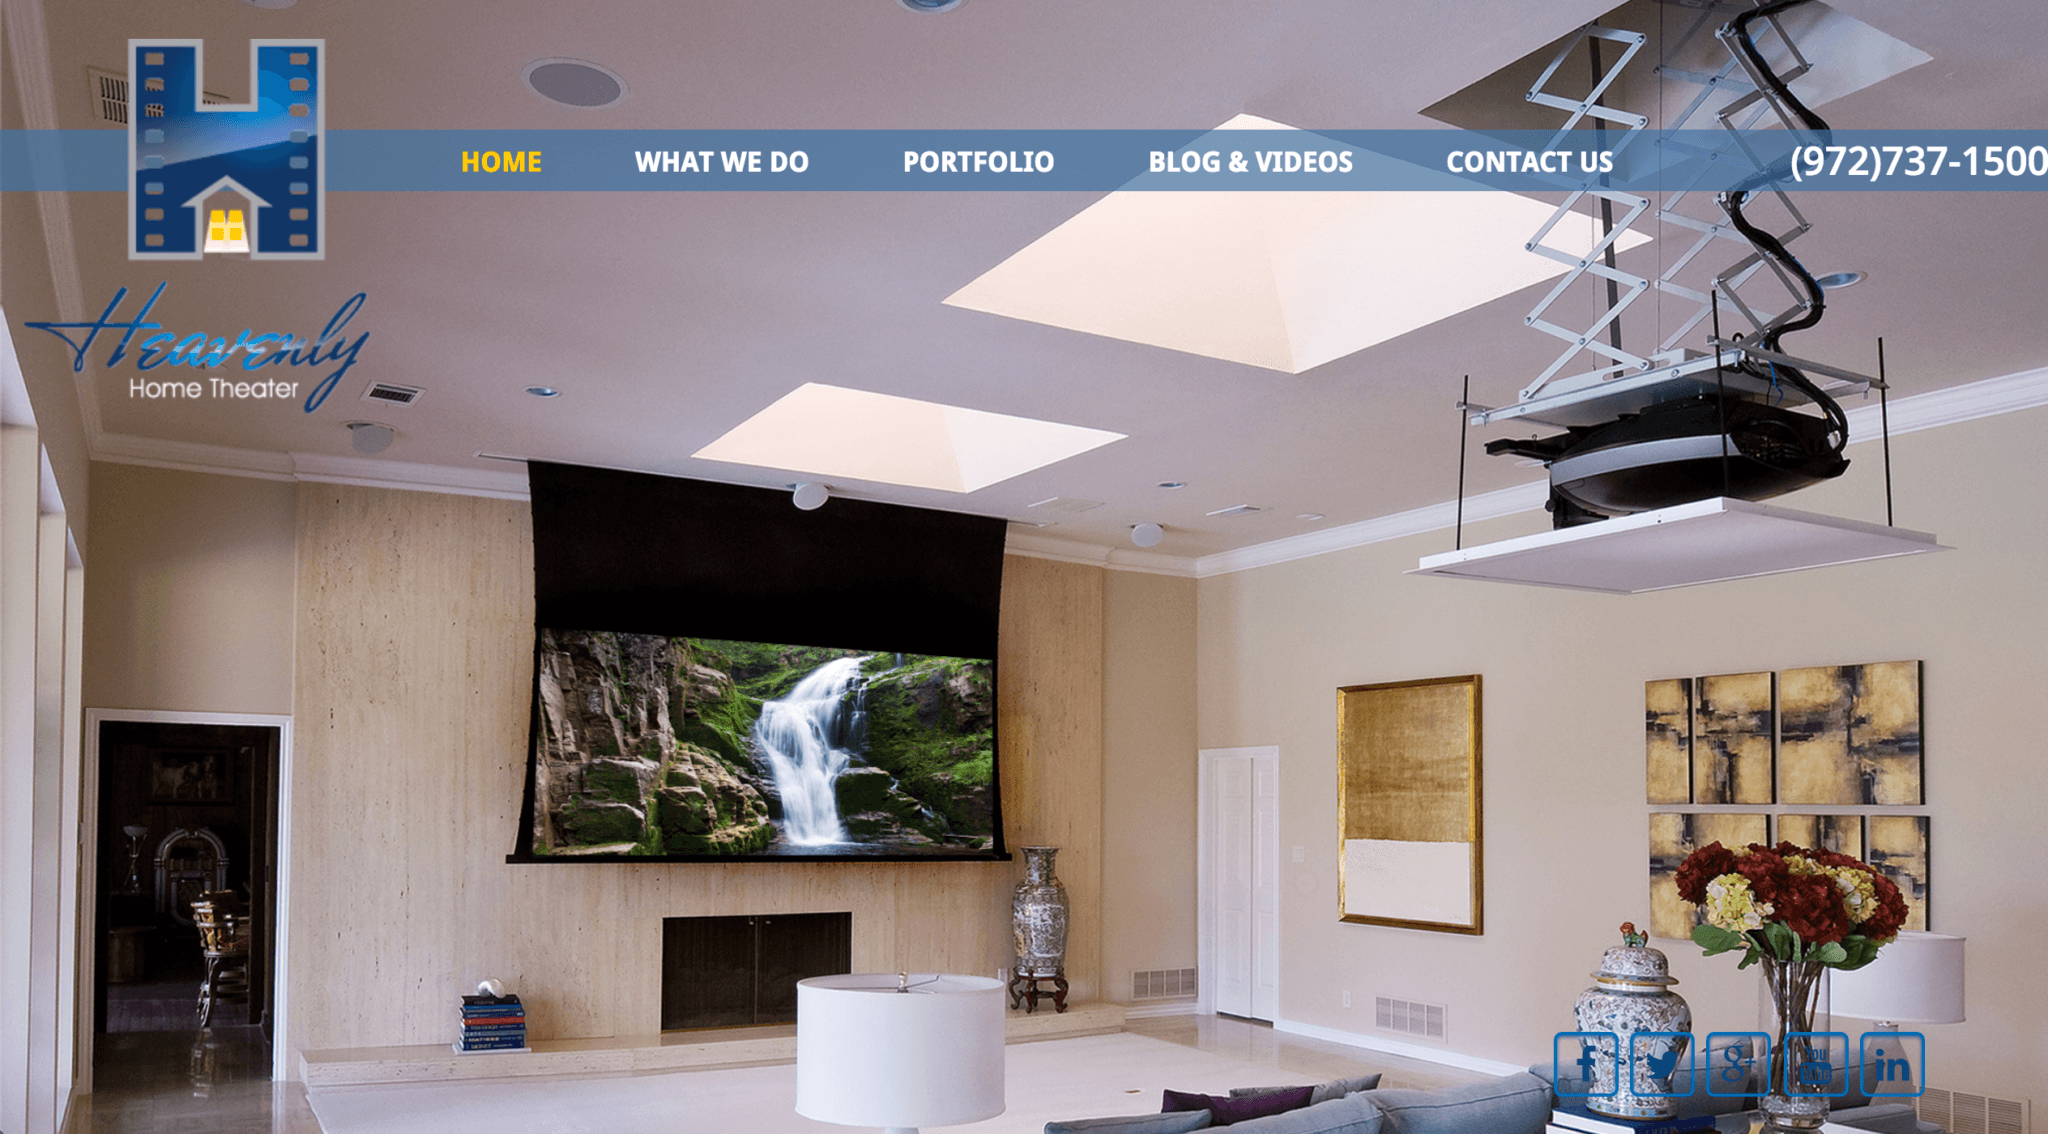 New Website: Heavenly Home Theater